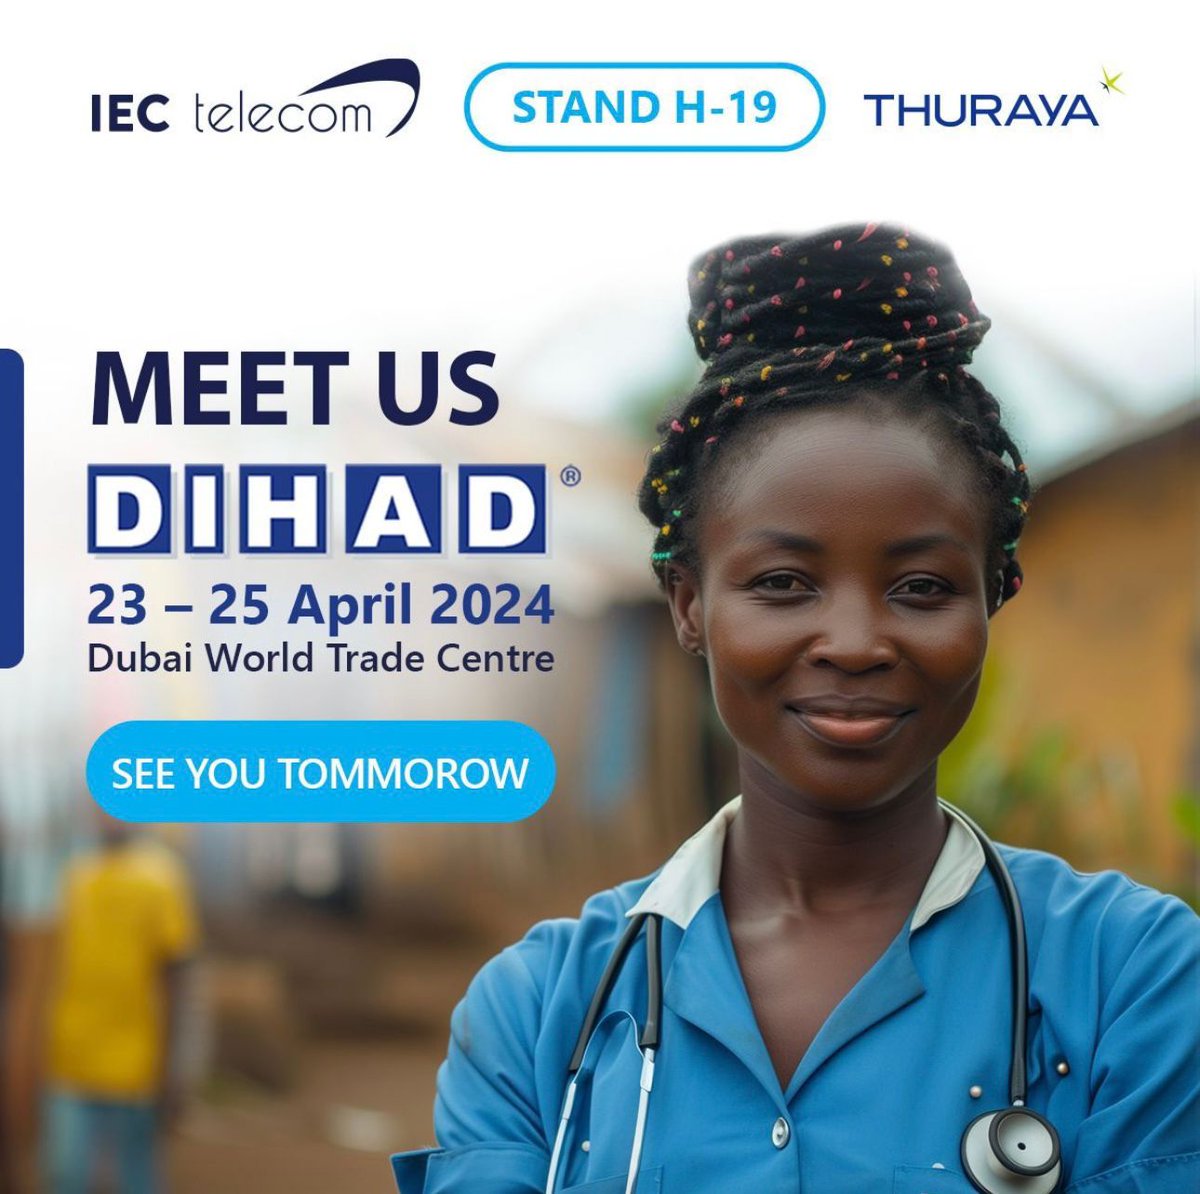 Media friends and partners, see you at DIHAD exhibition and conference 2024 - MENA region’s leading humanitarian sector event (23-25 April 2024, Trade Center, Dubai, Stand H-19).

#humanitariansupport #awareness #technology #satcom #satellitetelecommunications #sherpacomms